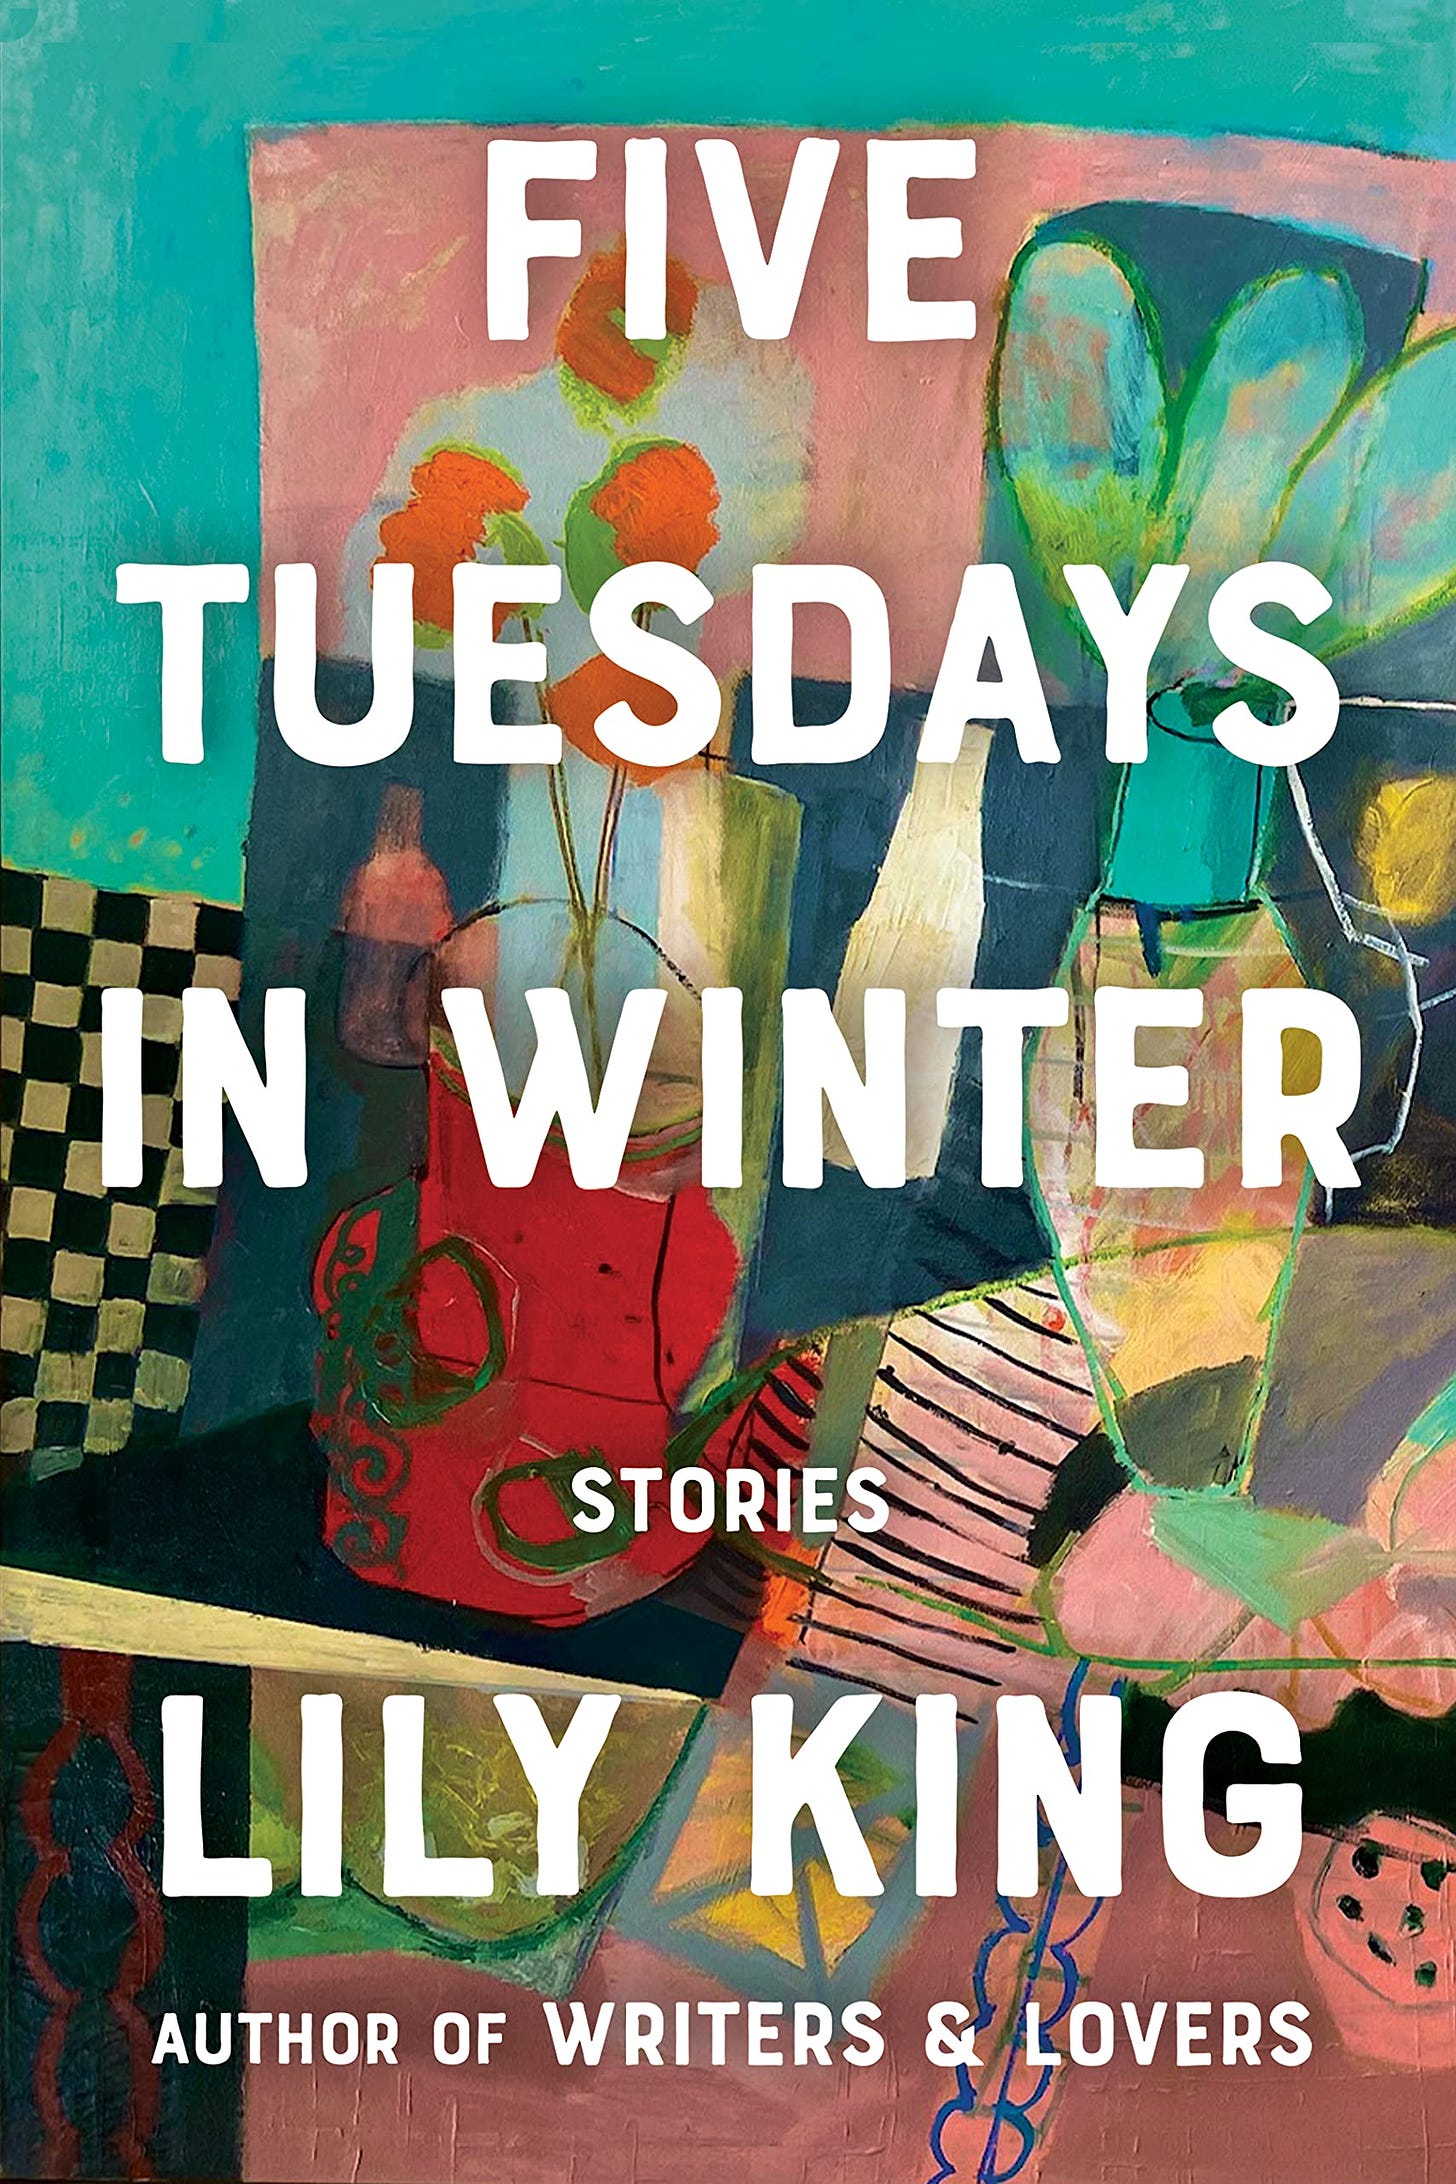 Five Tuesdays in Winter: King, Lily: 9780802158765: Amazon.com: Books